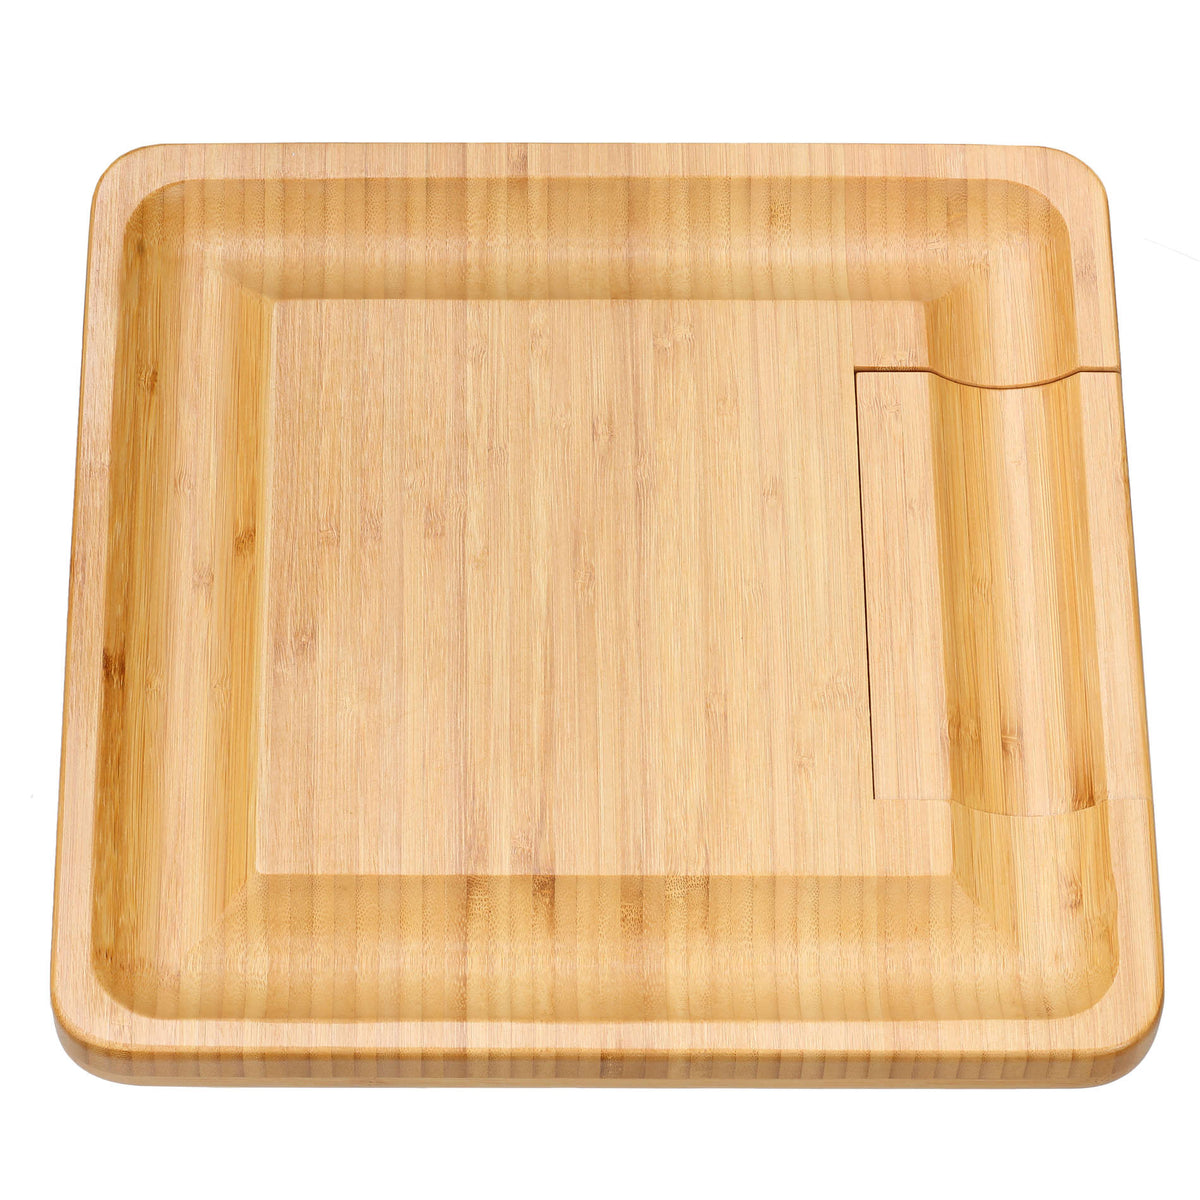 Cortesi Home Handi Natural Bamboo Cheese Serving Board Table Set with 4 Stainless Steel Knives